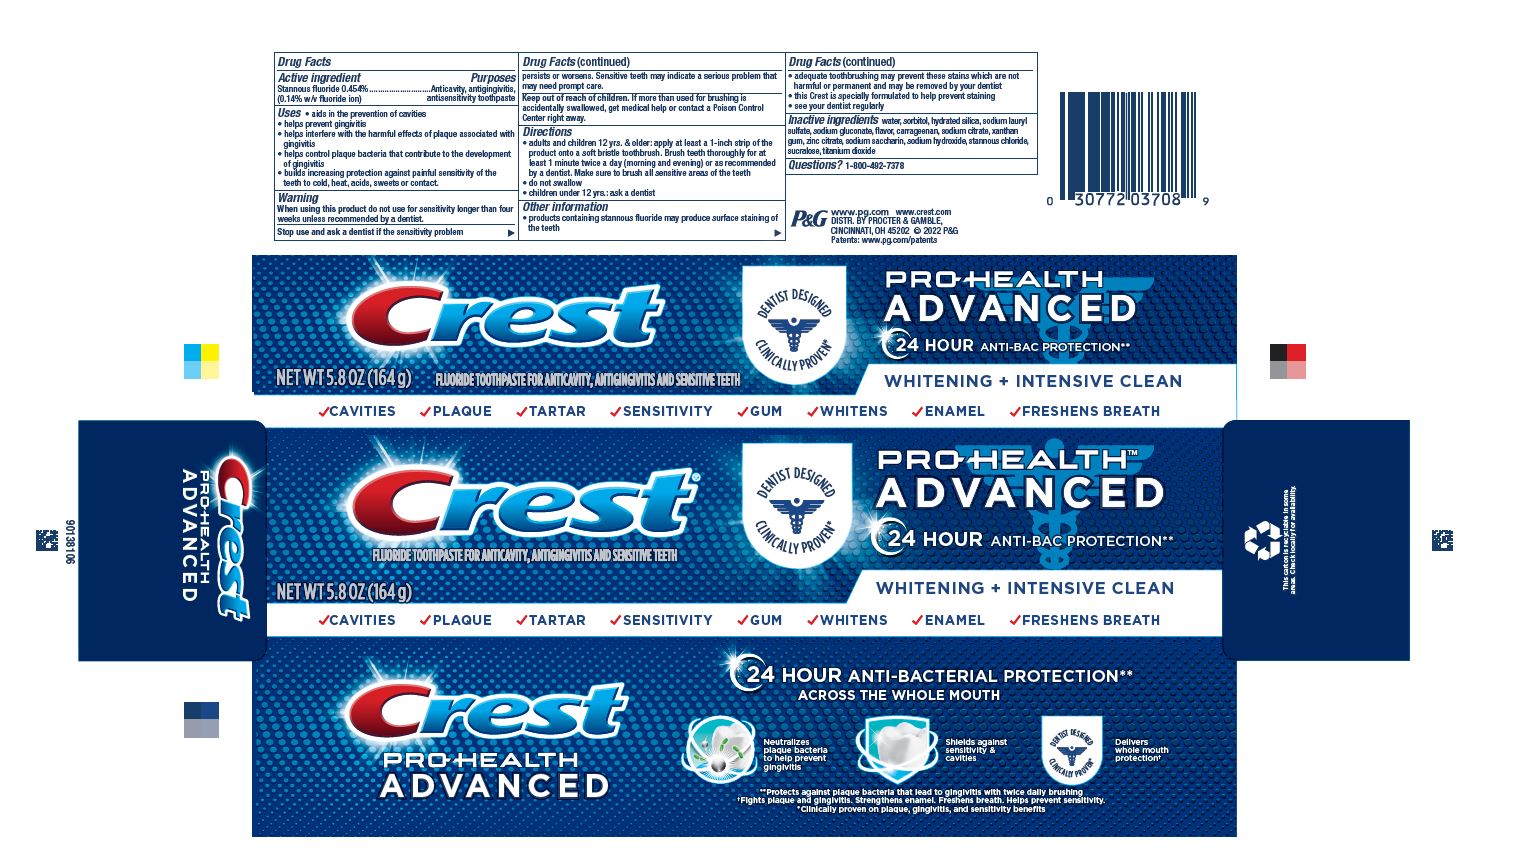 Crest Pro Health Advanced Whitening + Intensive Cleaning